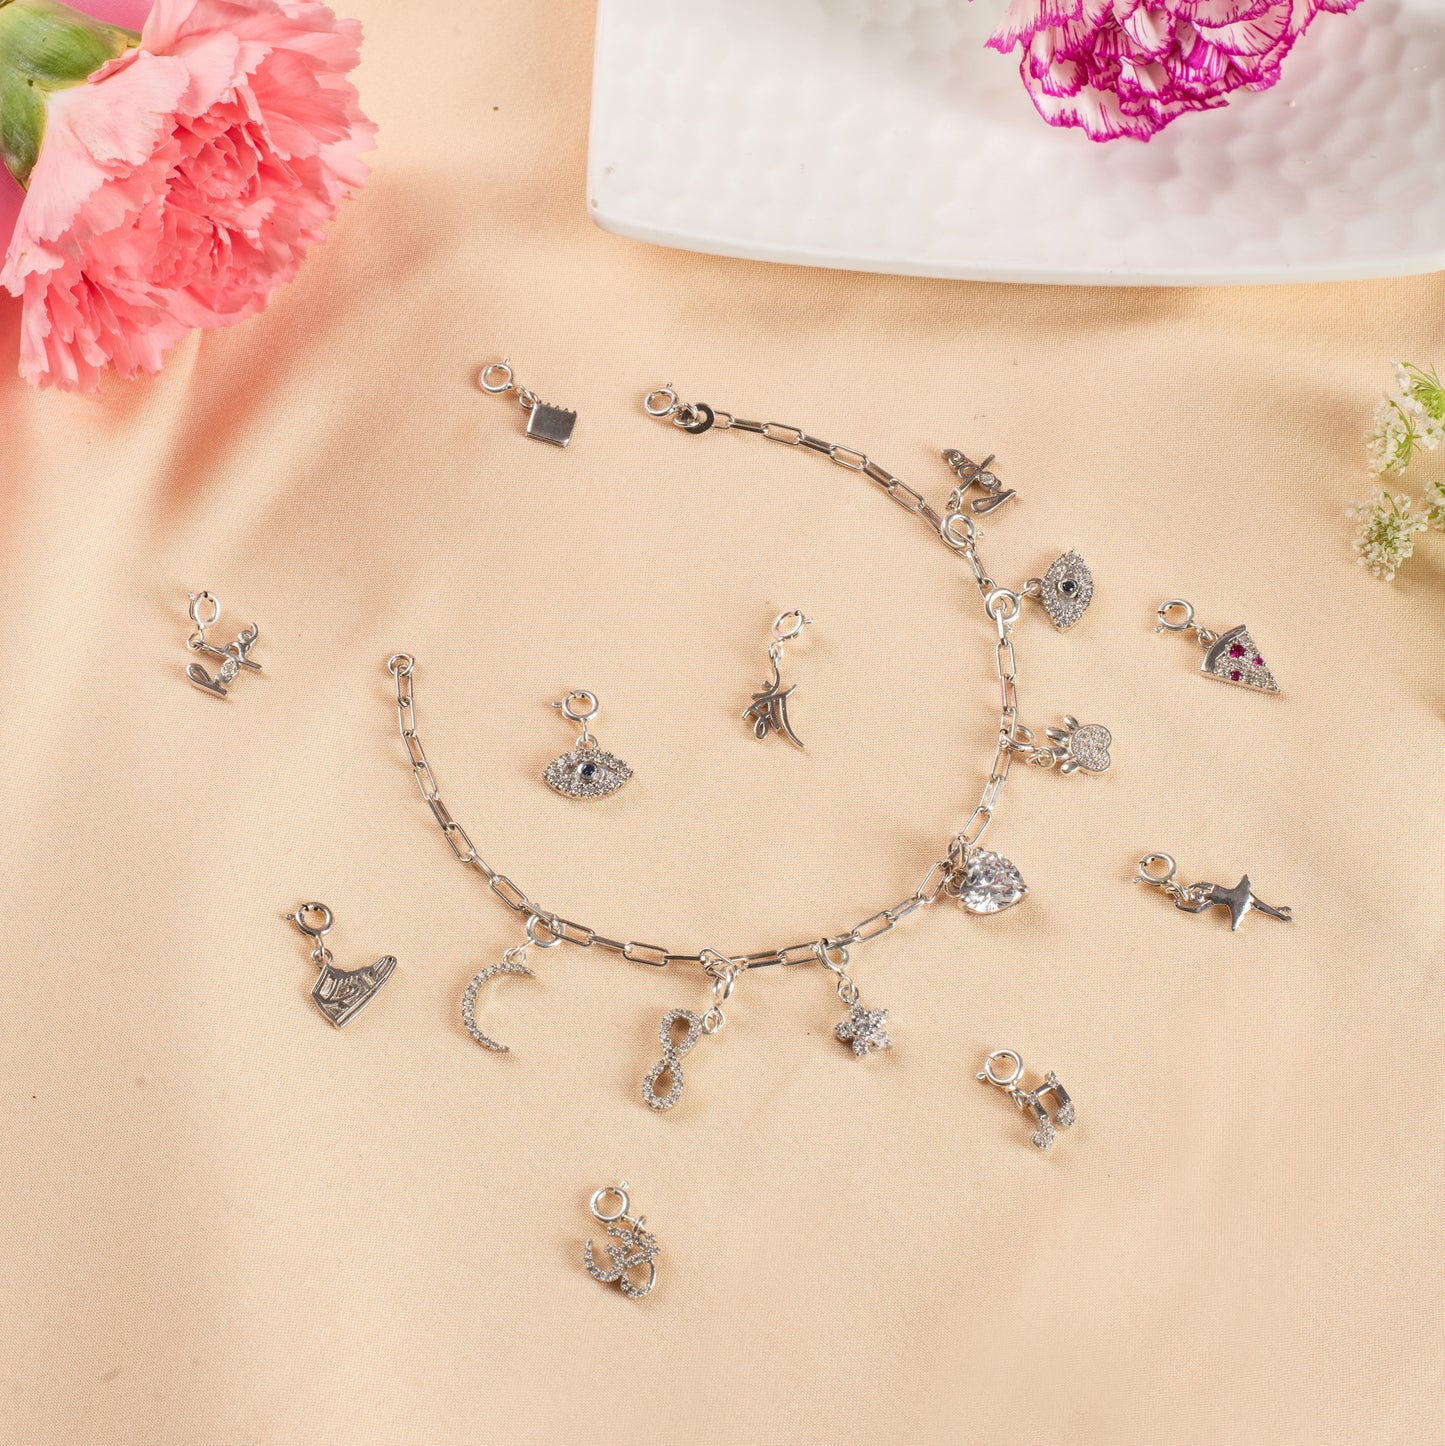 Personalized Charms Bracelet - 925 Silver (Pre-orders only)